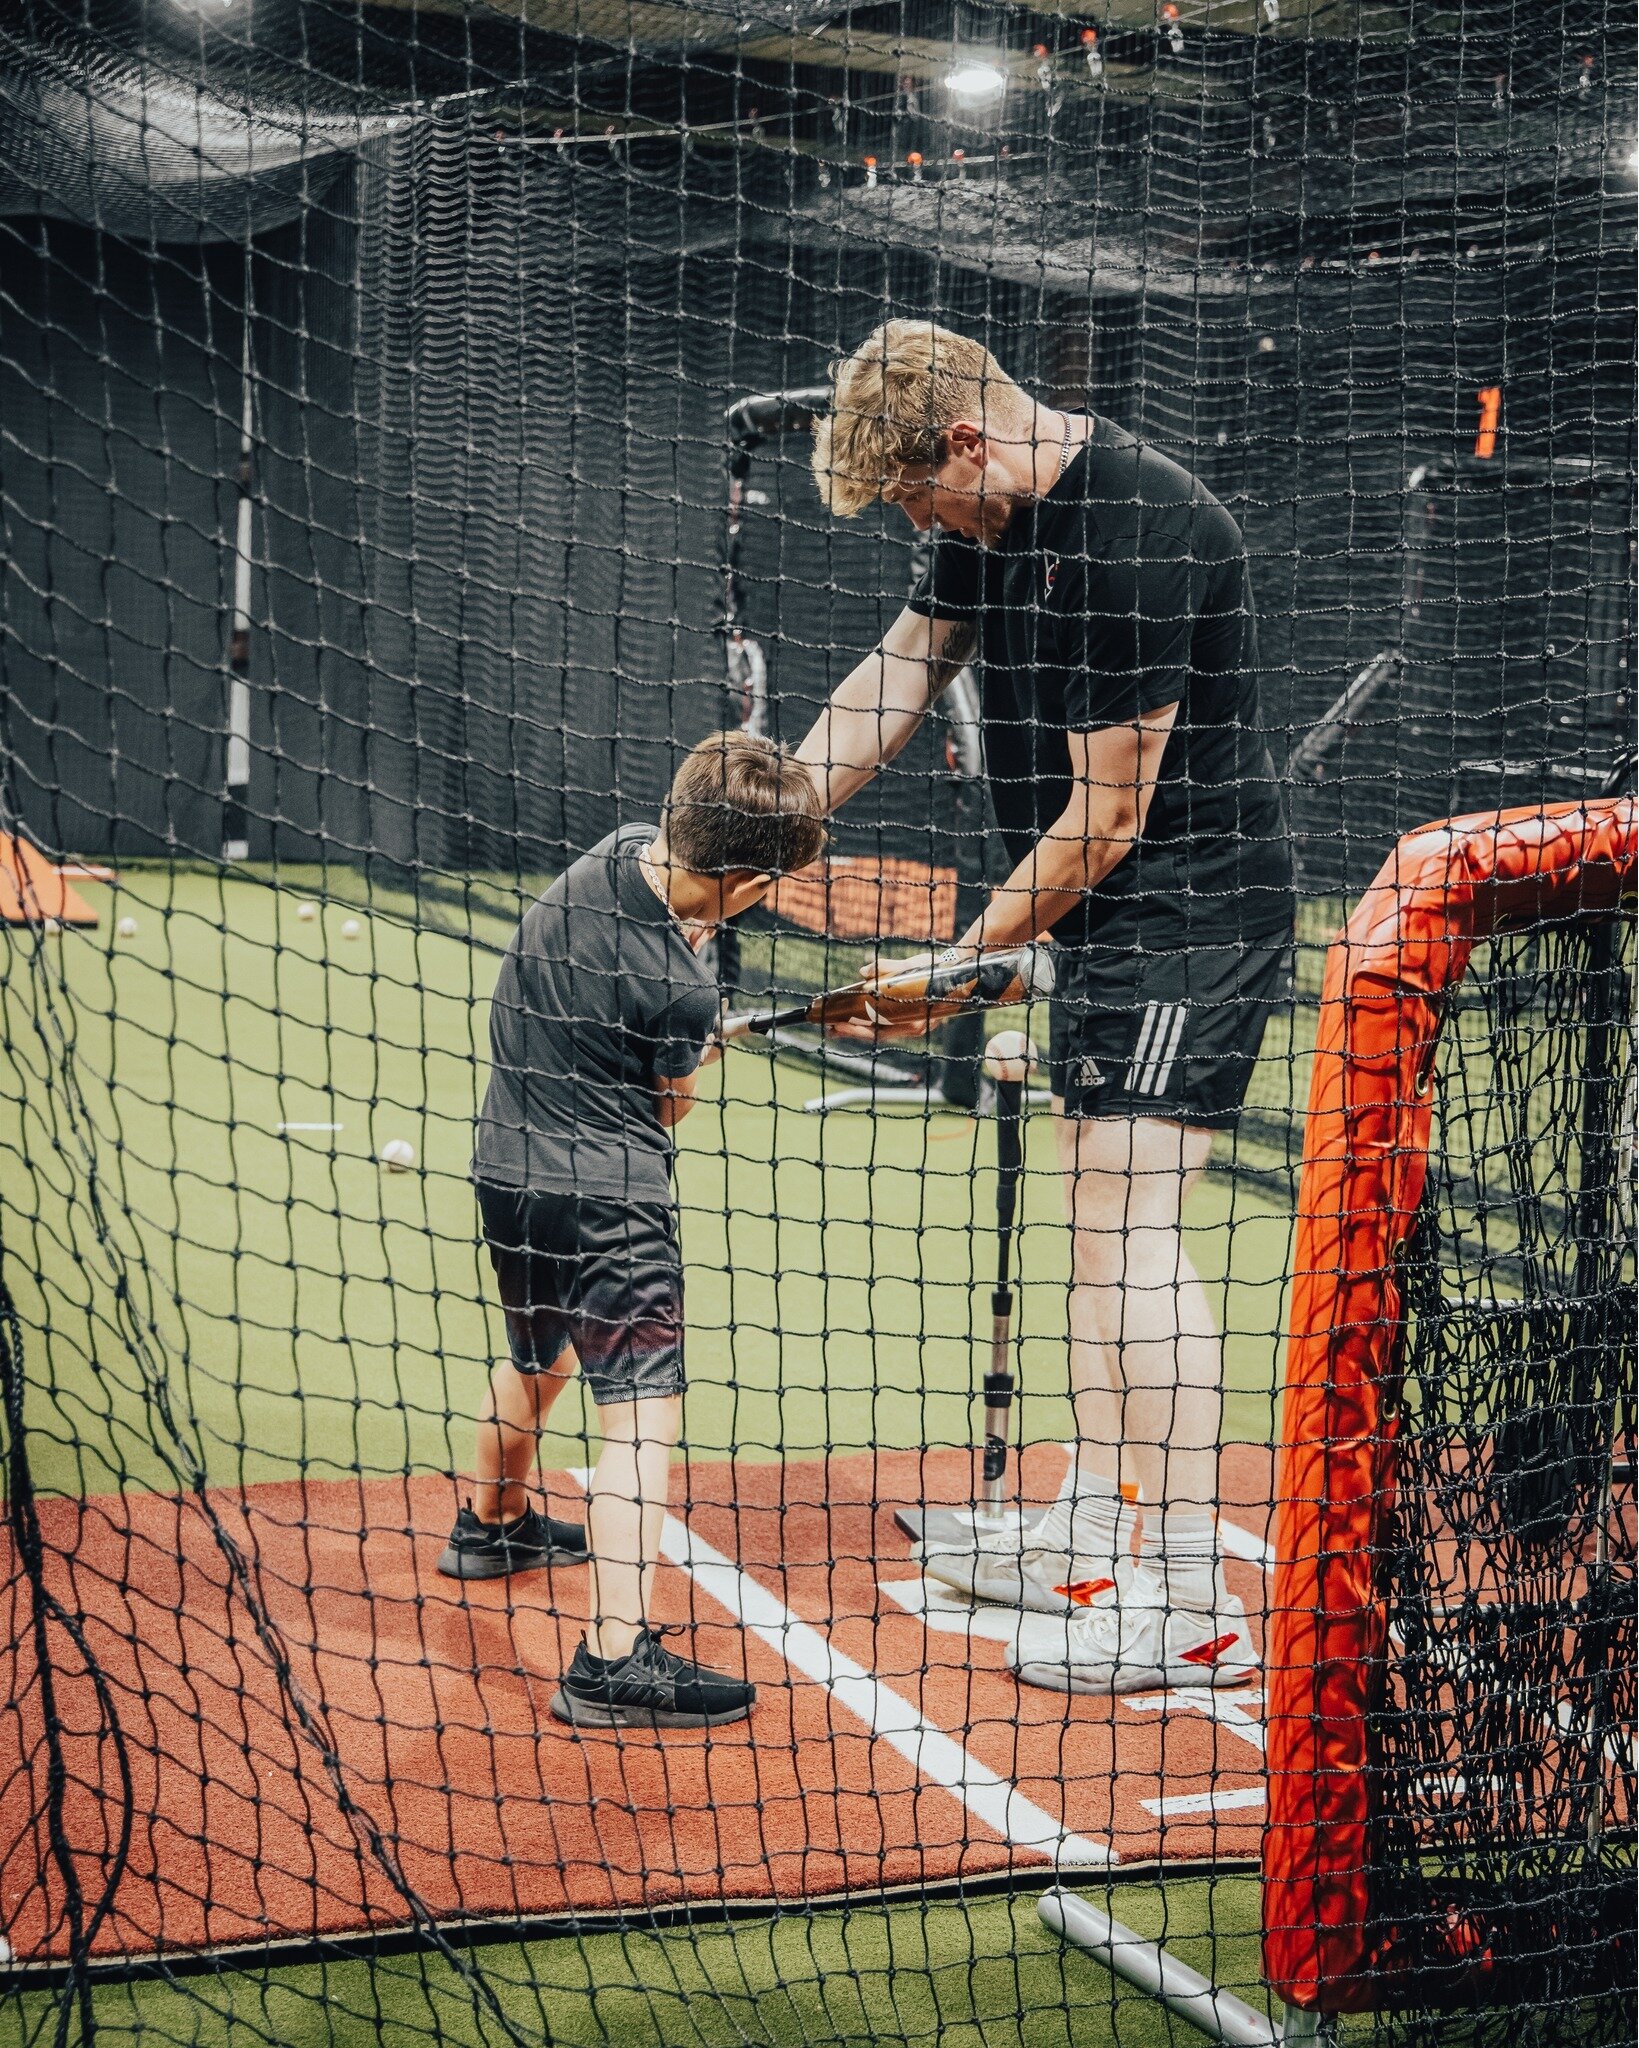 We love teaching the game and helping players of all ages be the best they can be on the field. Come see us for a private lesson with one of our top notch instructors! See You in The Vault🔒